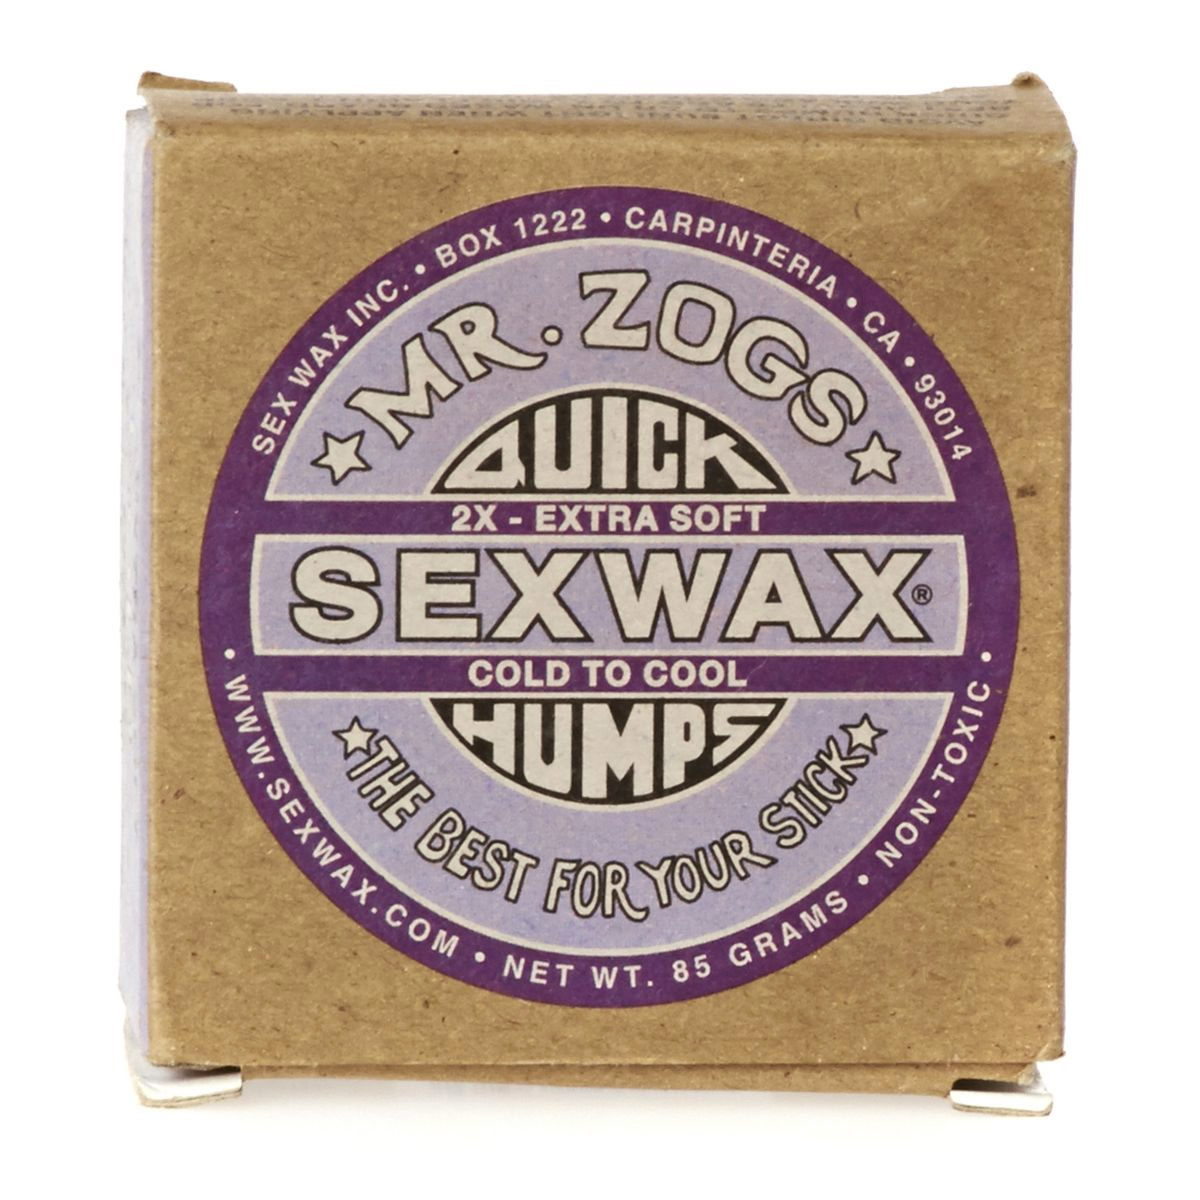 SEXWAX. The cool and the Cold. Cold softness.